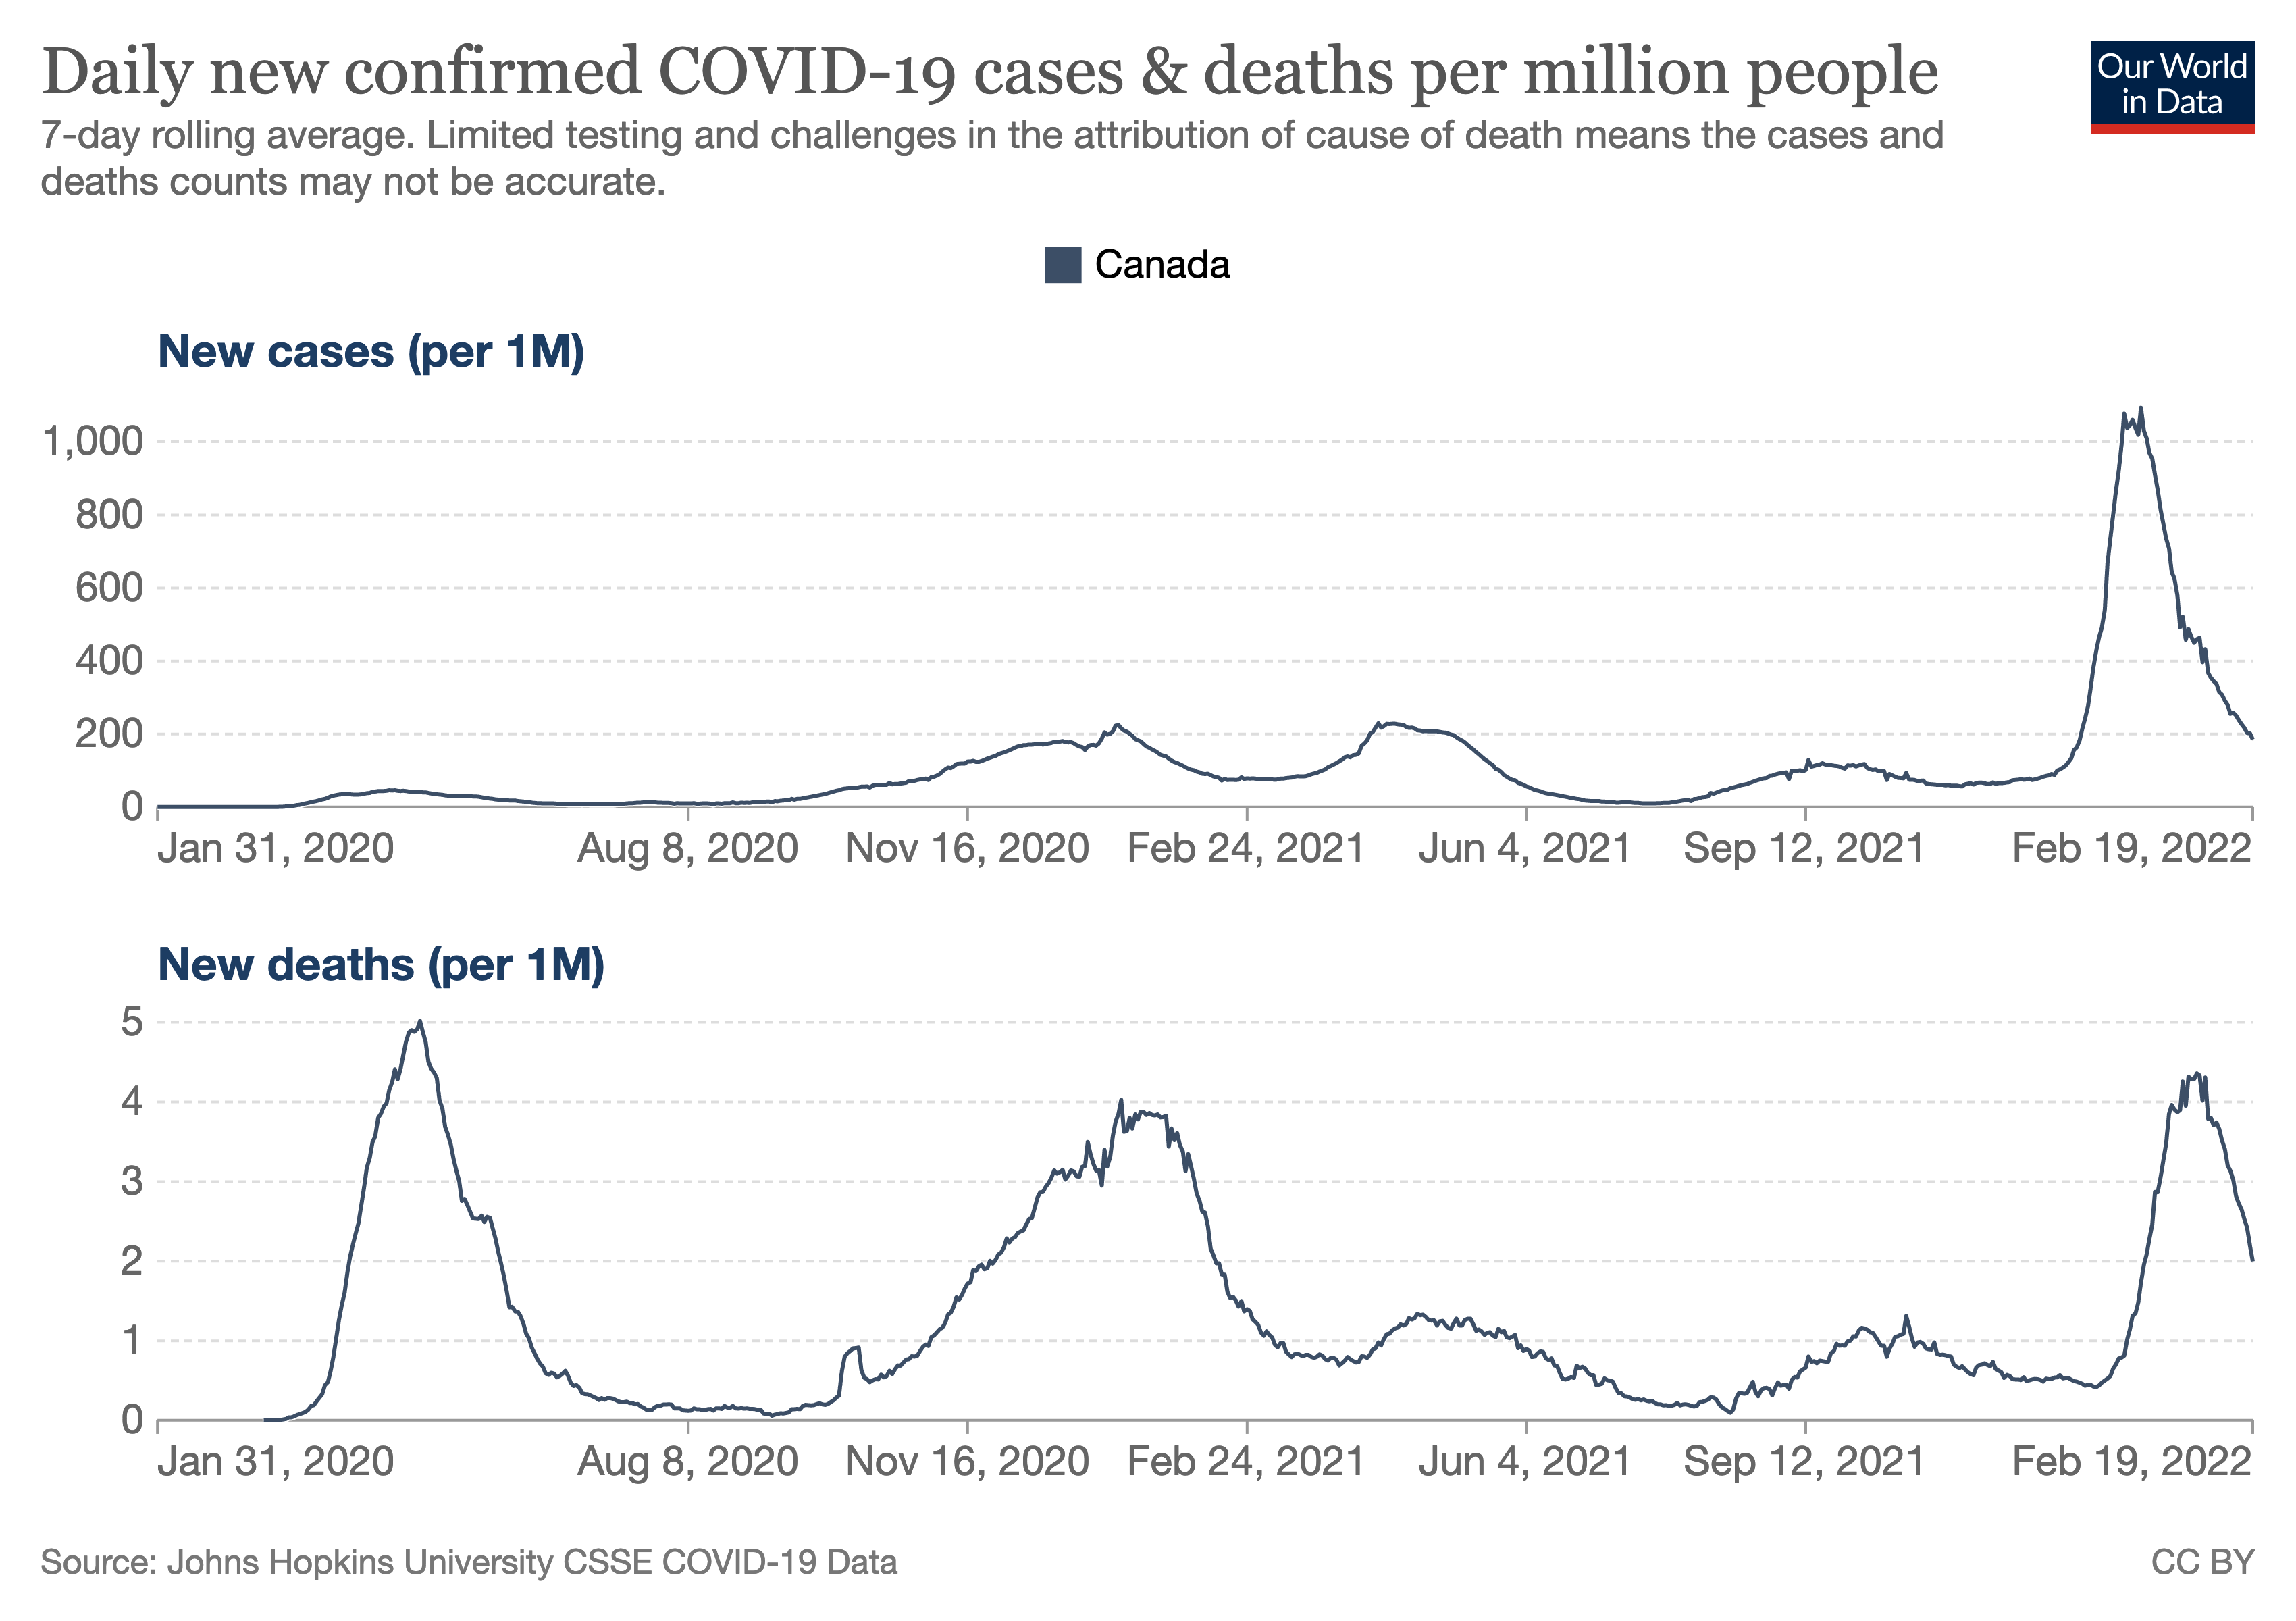 Chart showing COVID cases and deaths in Canada from the start of the pandemic until Feb 2022.